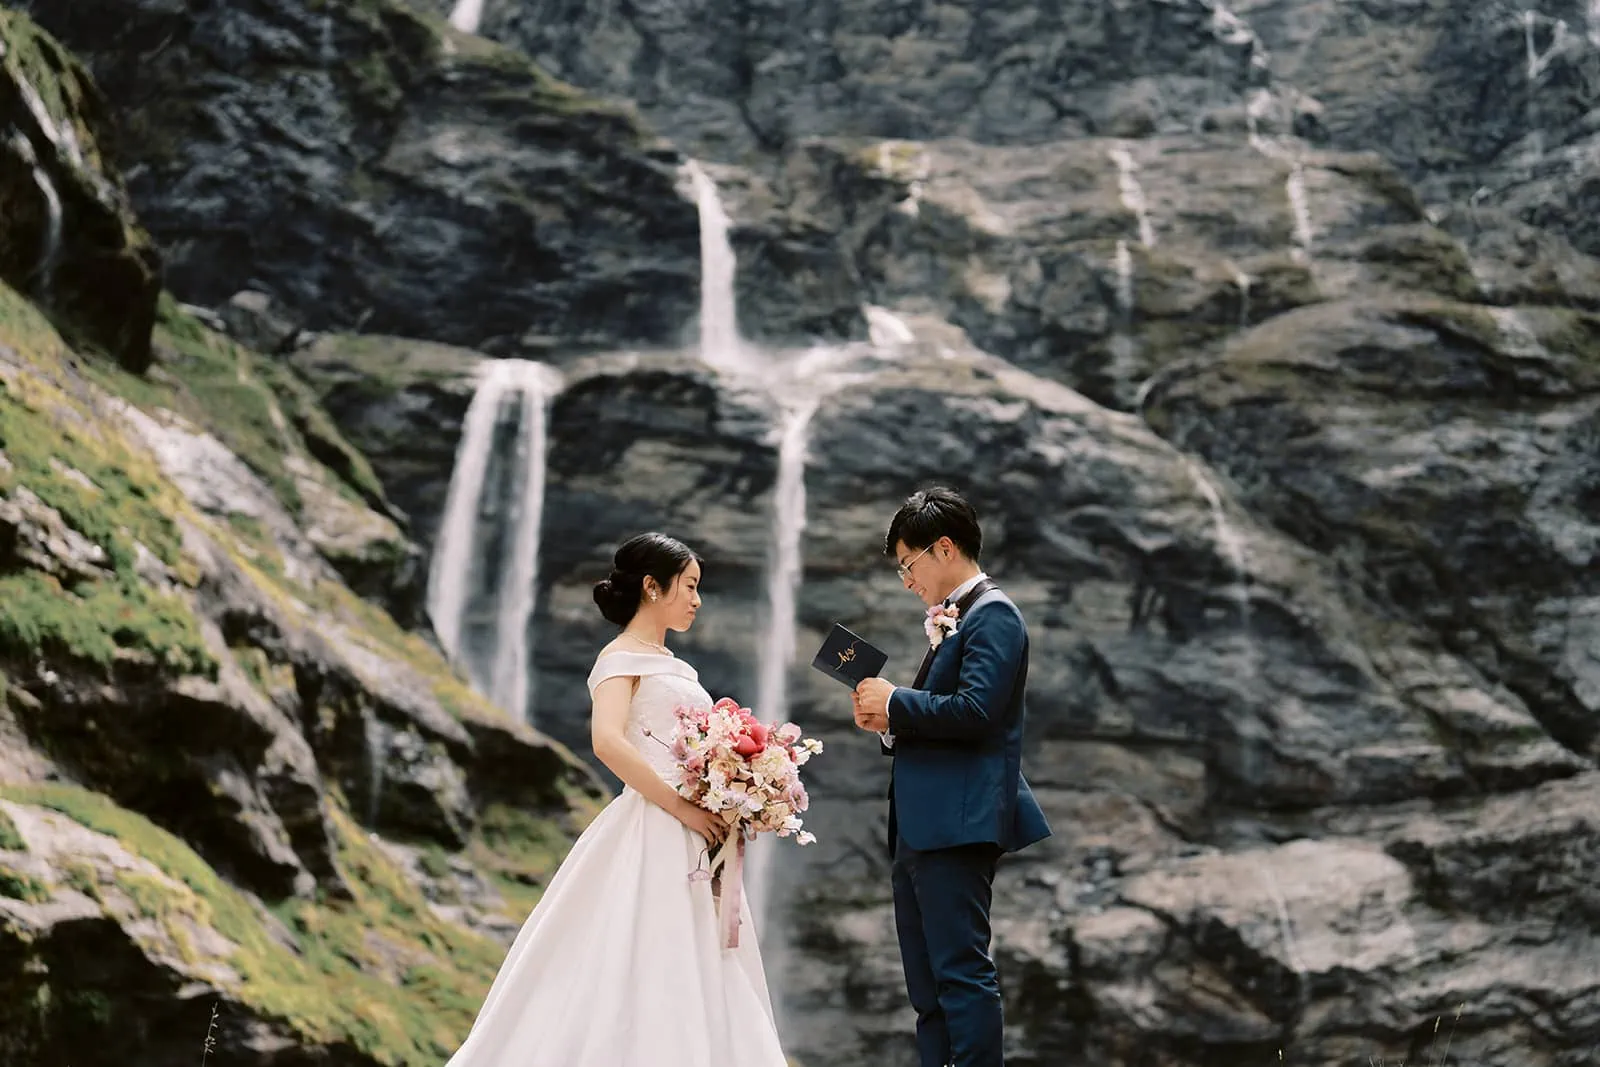 Kyoto Tokyo Japan Elopement Wedding Photographer, Planner & Videographer | A couple exchanging vows in front of a waterfall, captured by Yuri, a renowned Japan Wedding Photographer.